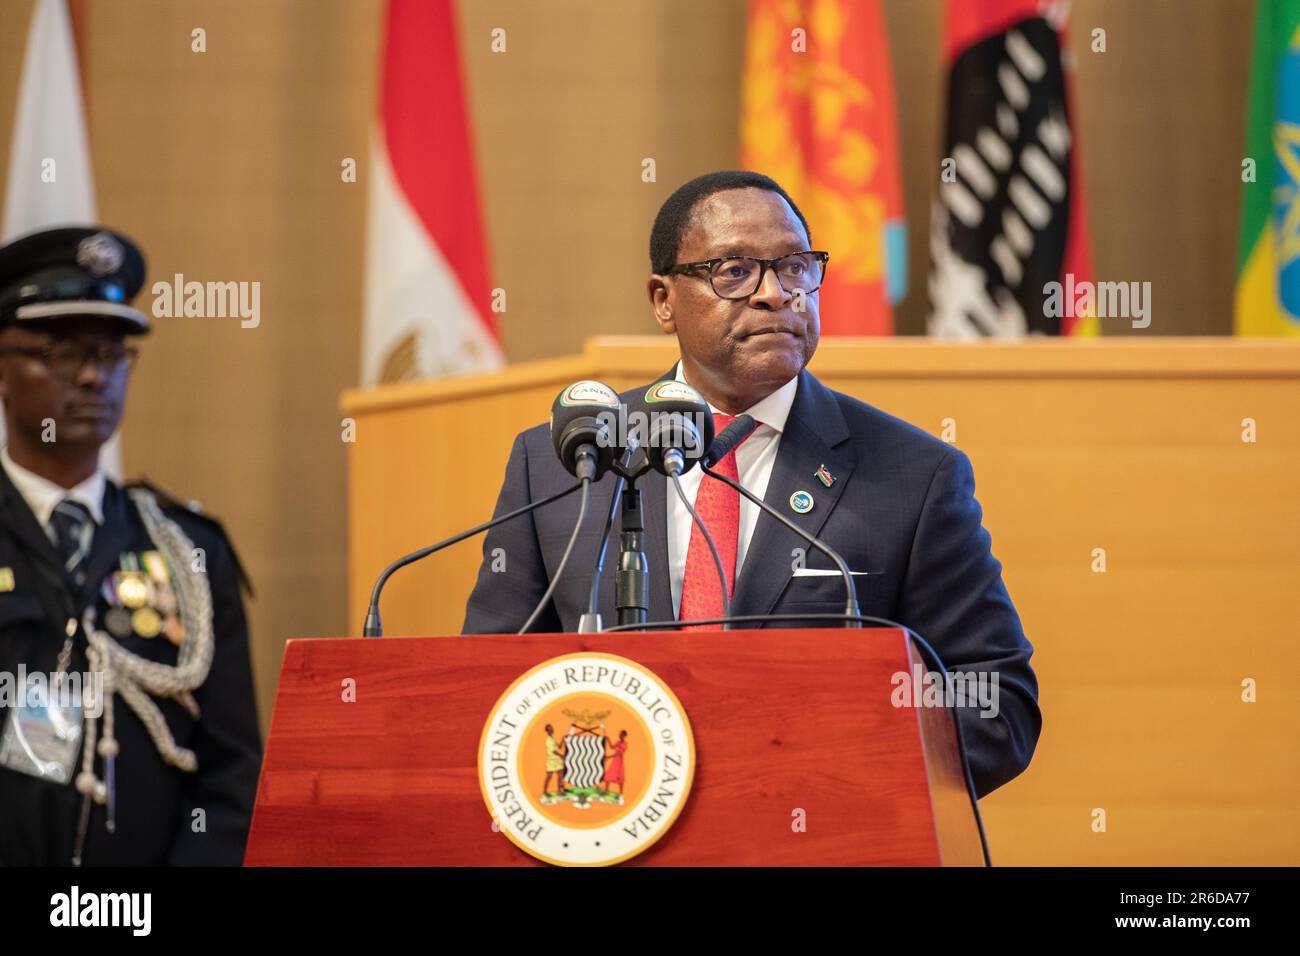 Lusaka, Zambia. 8th June, 2023. Malawian President Lazarus Chakwera speaks during the 22nd Common Market for Eastern and Southern Africa (COMESA) Heads of State and Government Summit in Lusaka, Zambia, June 8, 2023. The 22nd Common Market for Eastern and Southern Africa (COMESA) Heads of State and Government Summit opened here Thursday, with leaders calling for accelerated efforts to achieve economic integration. Credit: Peng Lijun/Xinhua/Alamy Live News Stock Photo